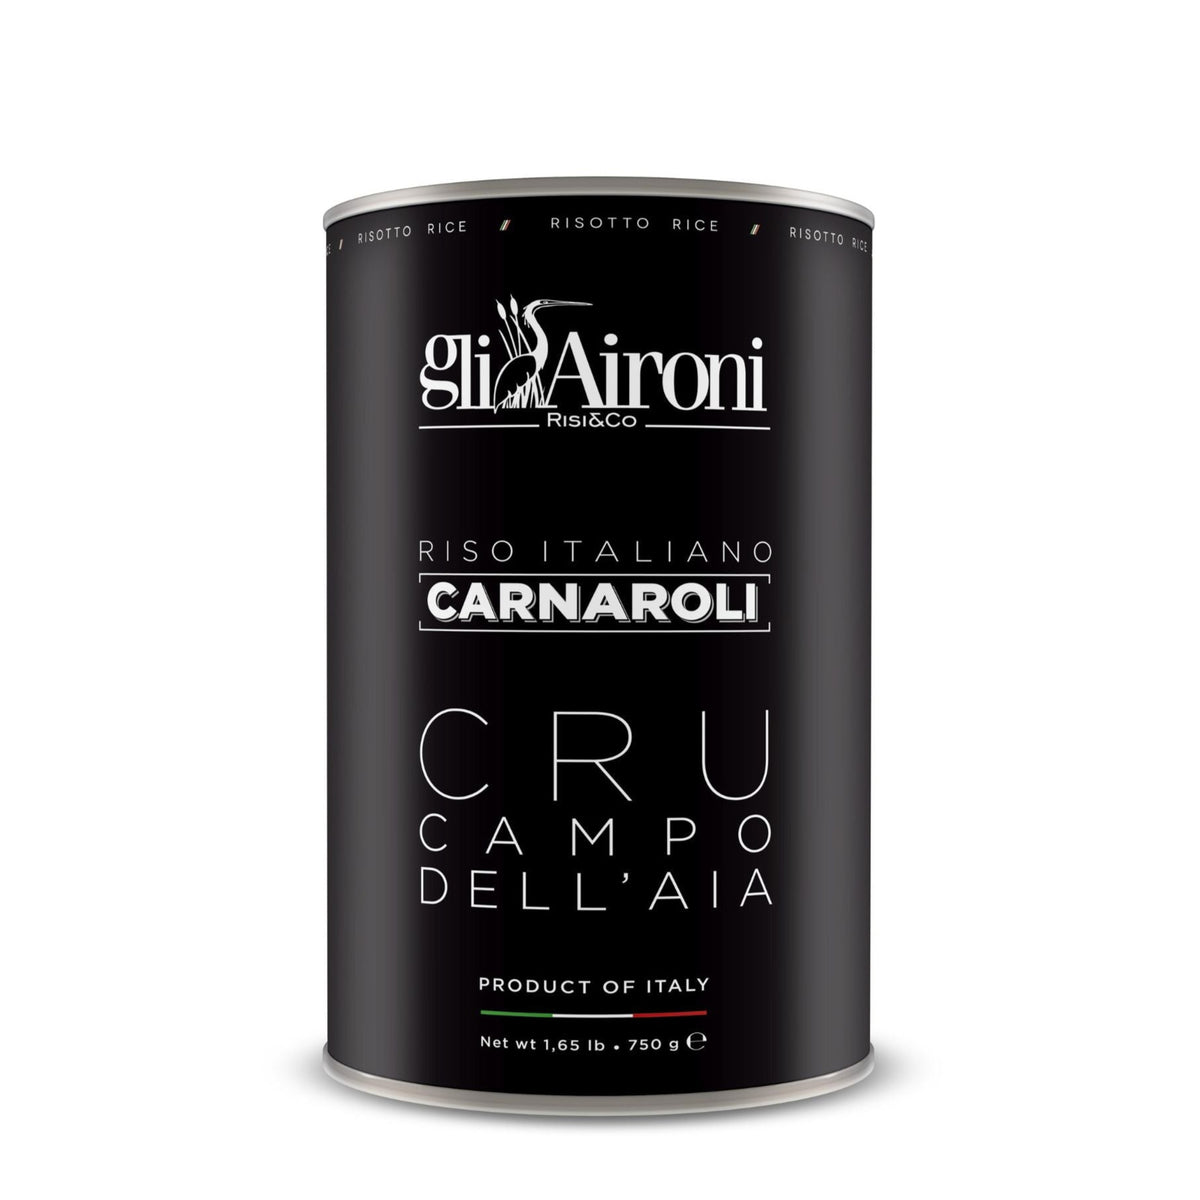 Gli Aironi Cru Carnaroli Rice 750g (Black Tin)  | Imported and distributed in the UK by Just Gourmet Foods